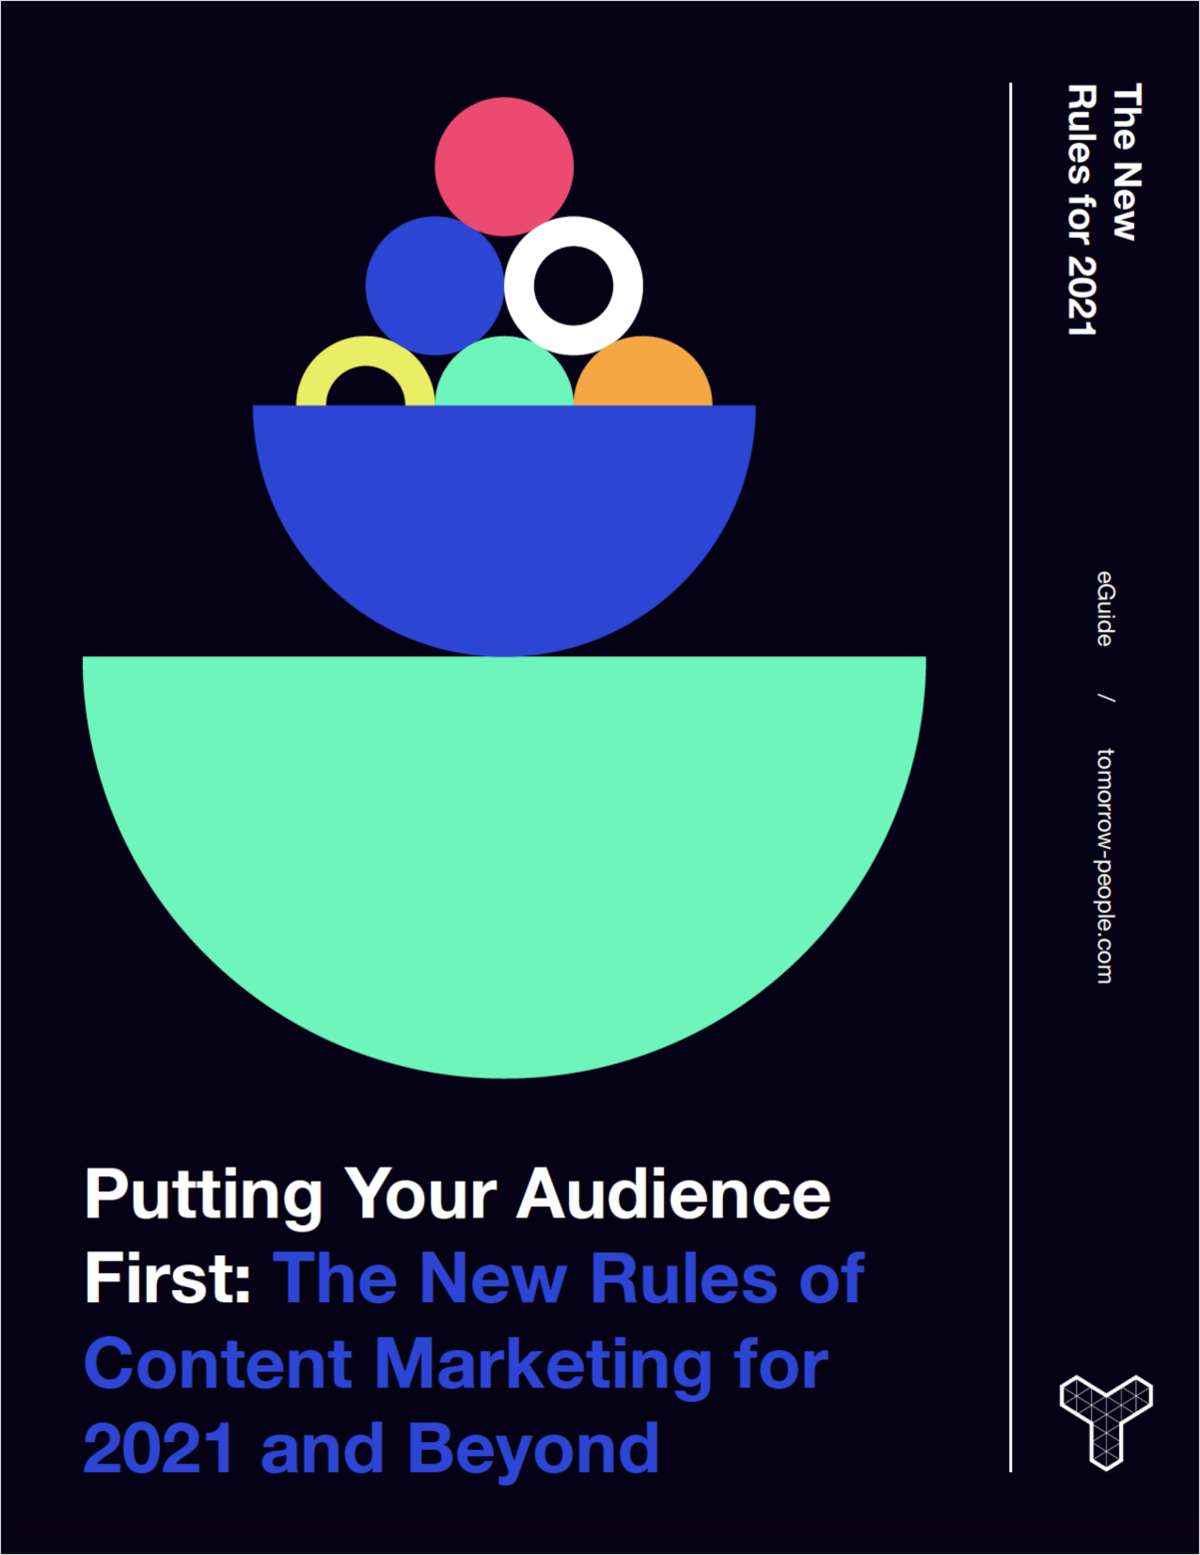 Putting Your Audience First - The New Rules of Content Marketing for 2021 and Beyond